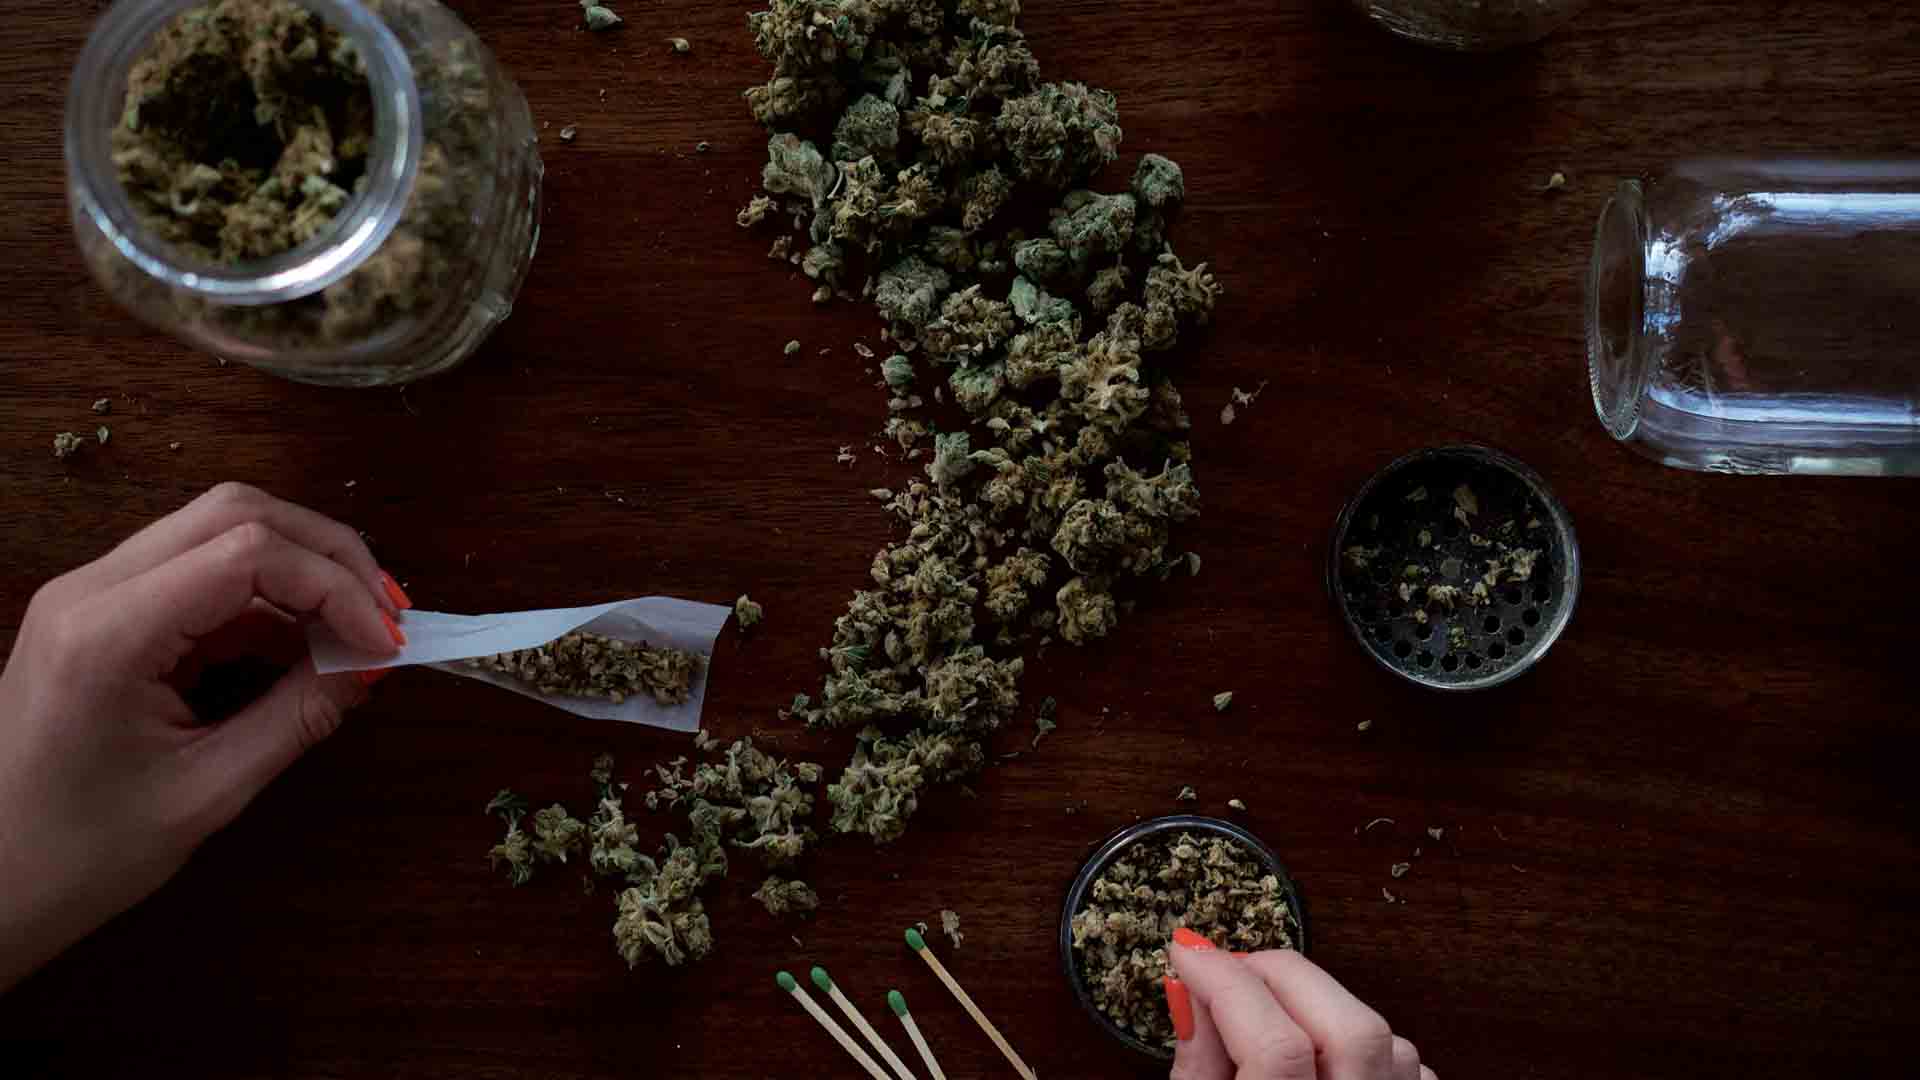 Female hands roll cannabis flower into a joint